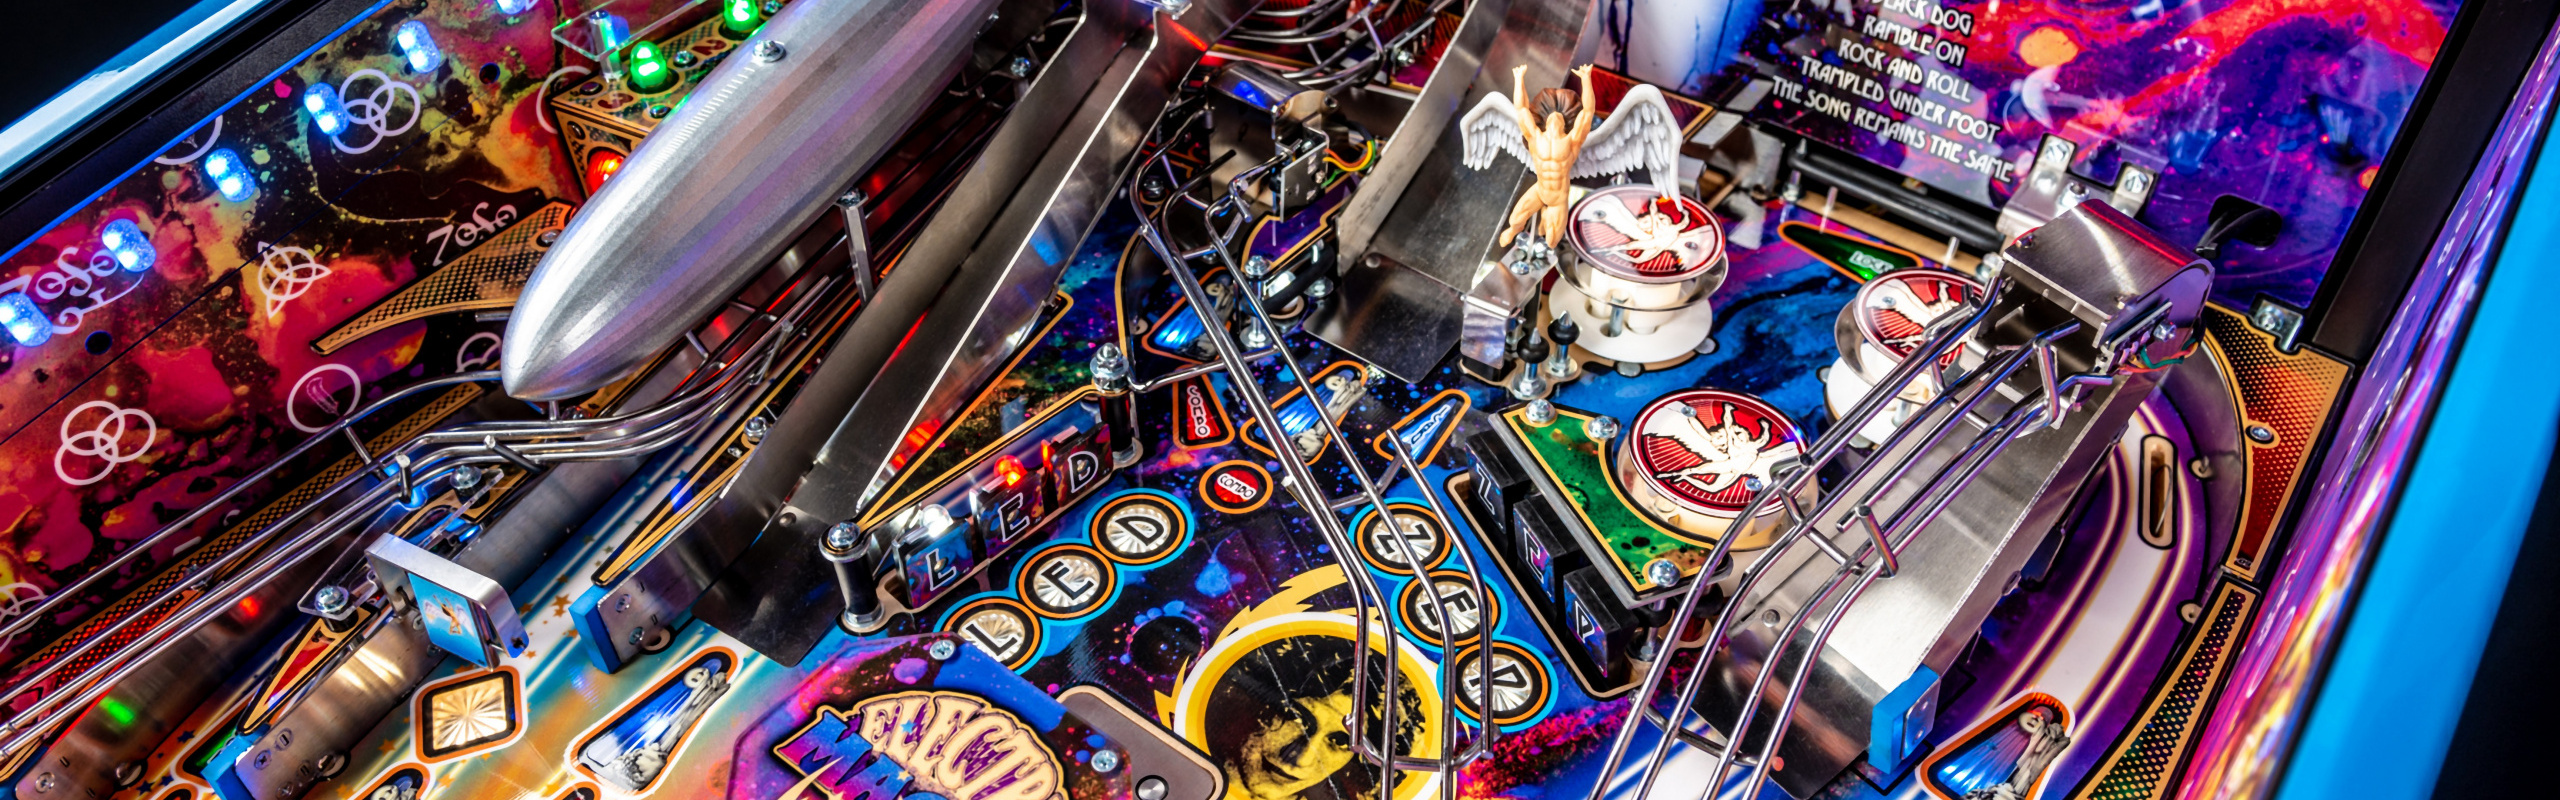 Led Zeppelin and Stern Pinball Announce New Rock and Roll Pinball Machines